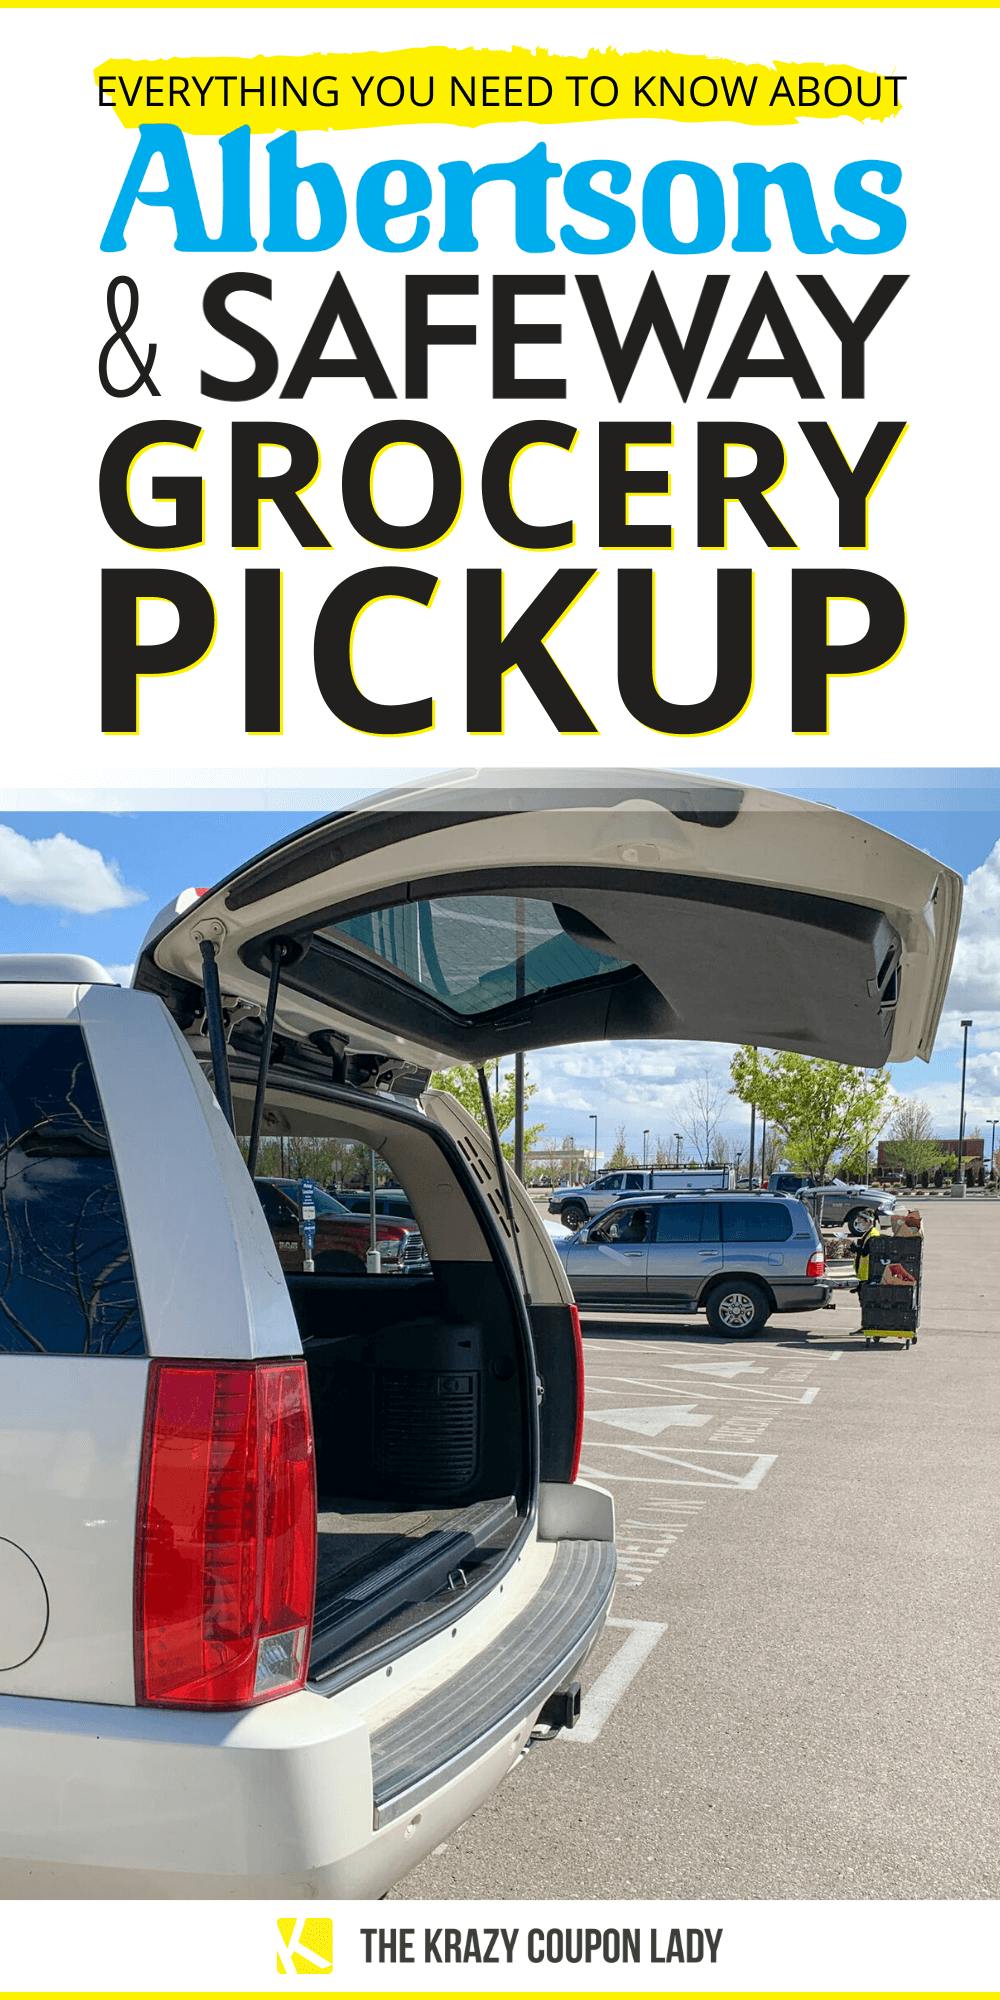 Your Guide to Safeway Grocery Pickup and Albertsons Grocery Pickup